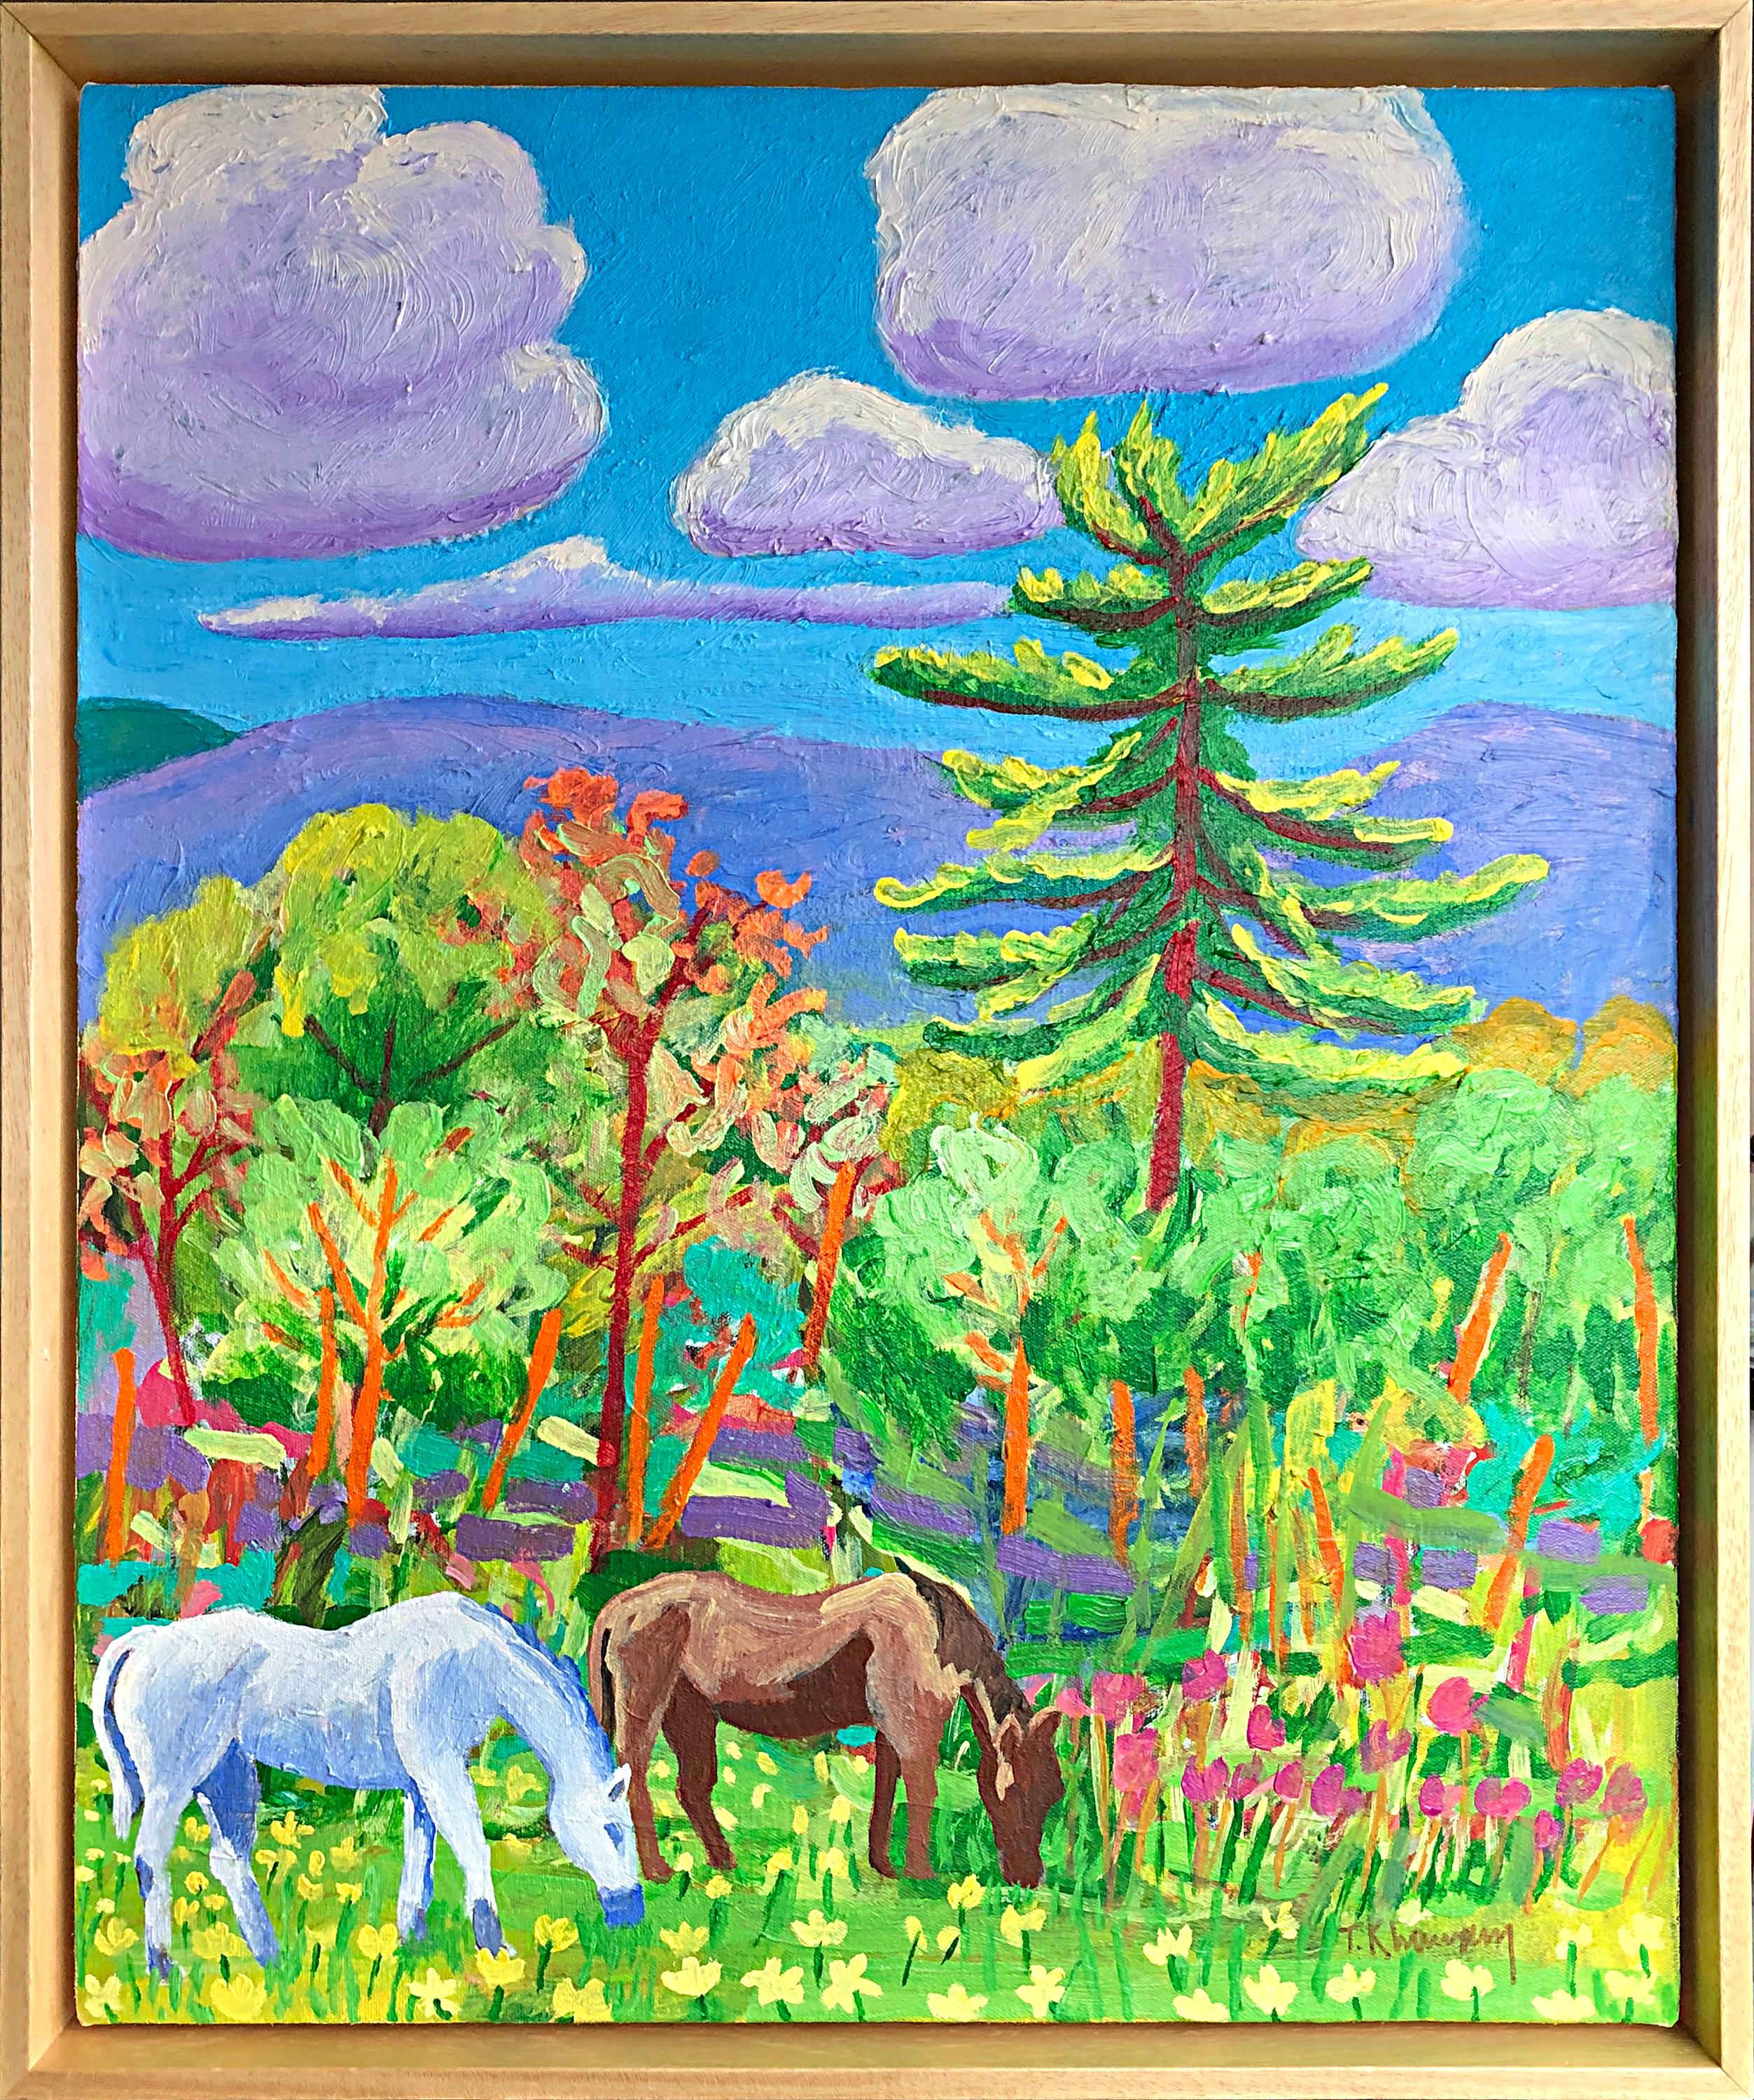 Tony Khawam Landscape Painting - Ponies of the Highlands